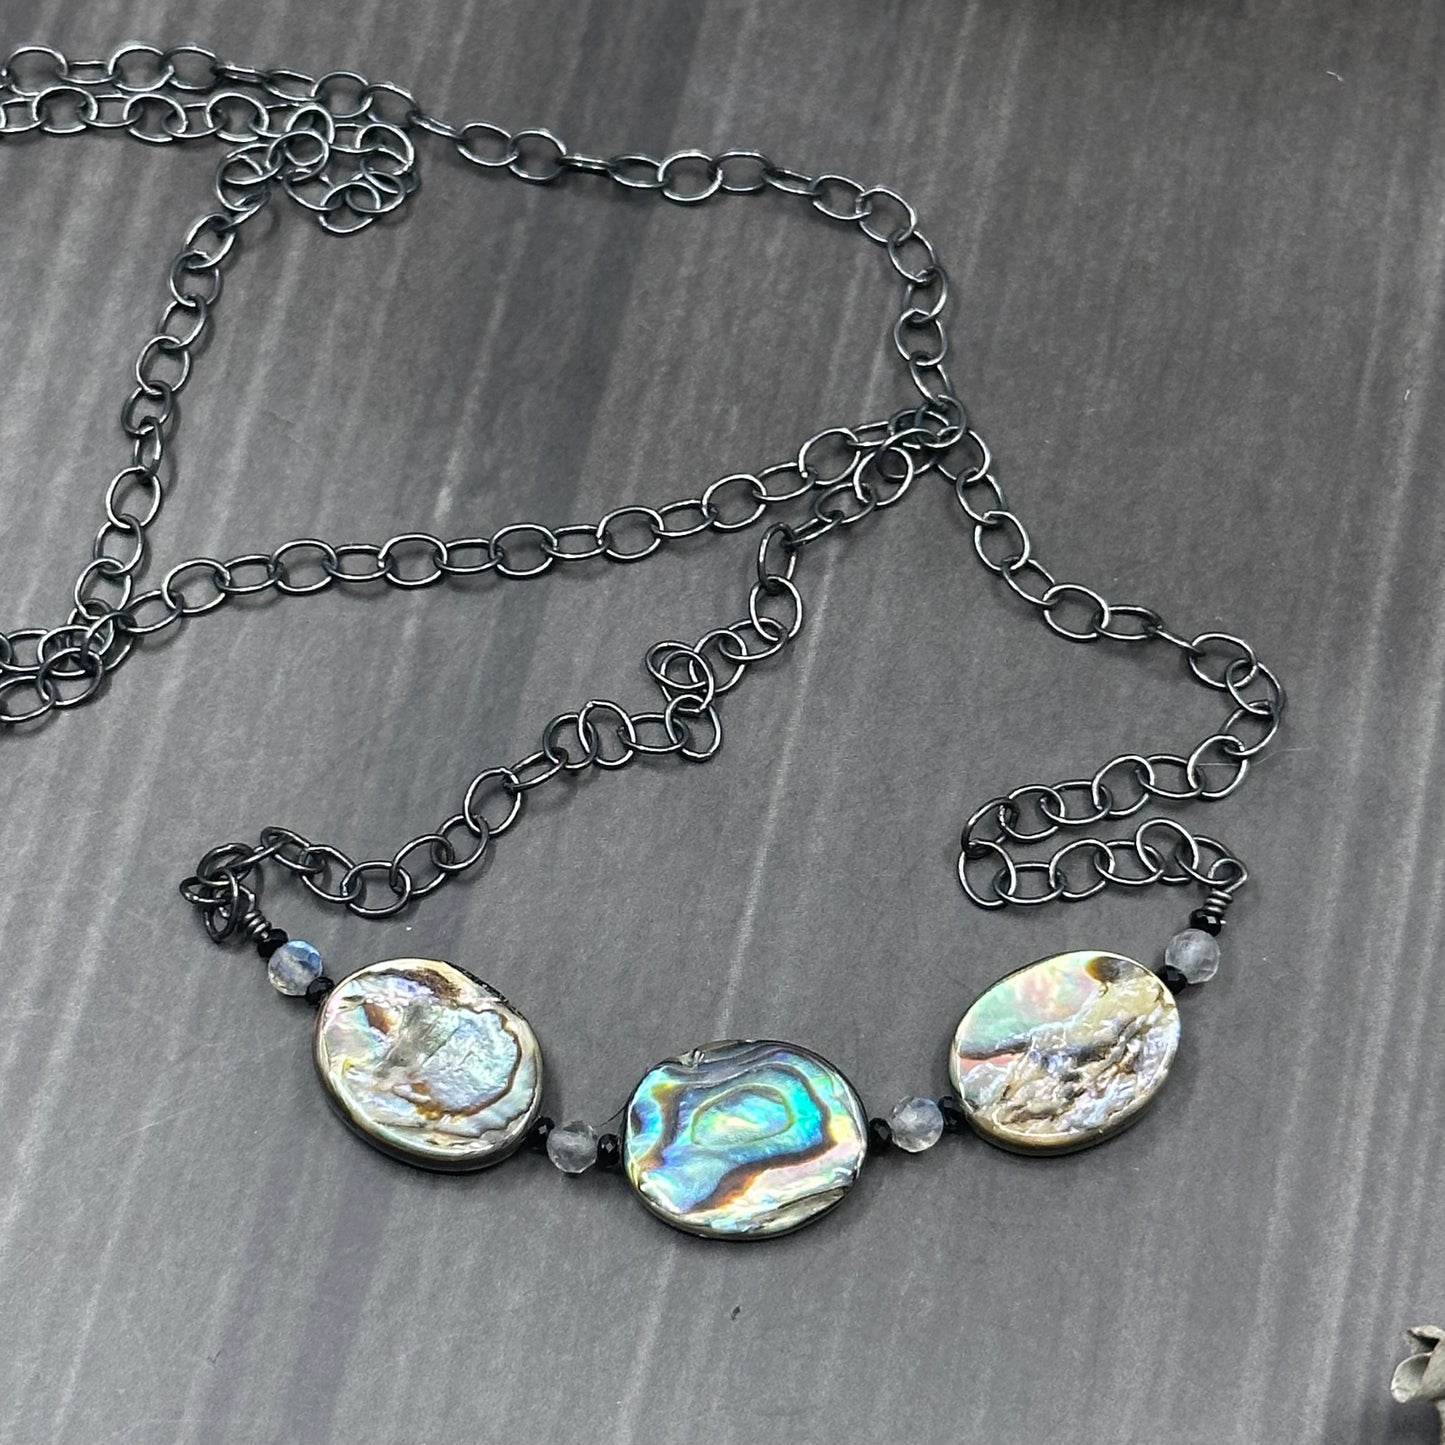 Abalone, Black Spinel, and Labradorite Sterling silver necklace